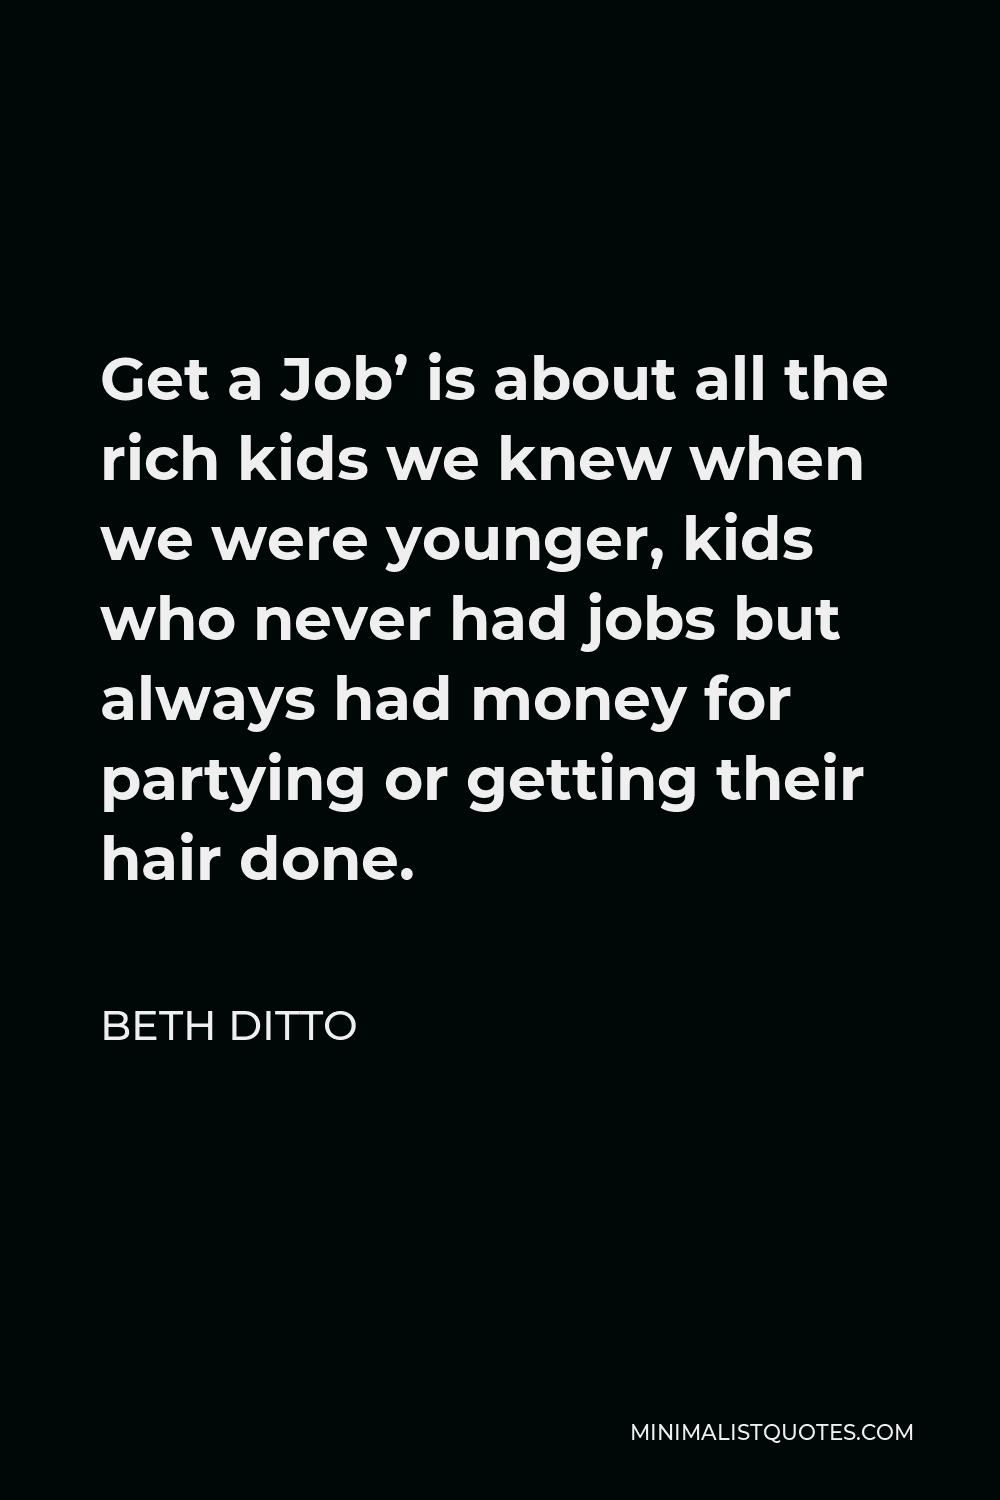 Beth Ditto Quote - Get a Job’ is about all the rich kids we knew when we were younger, kids who never had jobs but always had money for partying or getting their hair done.